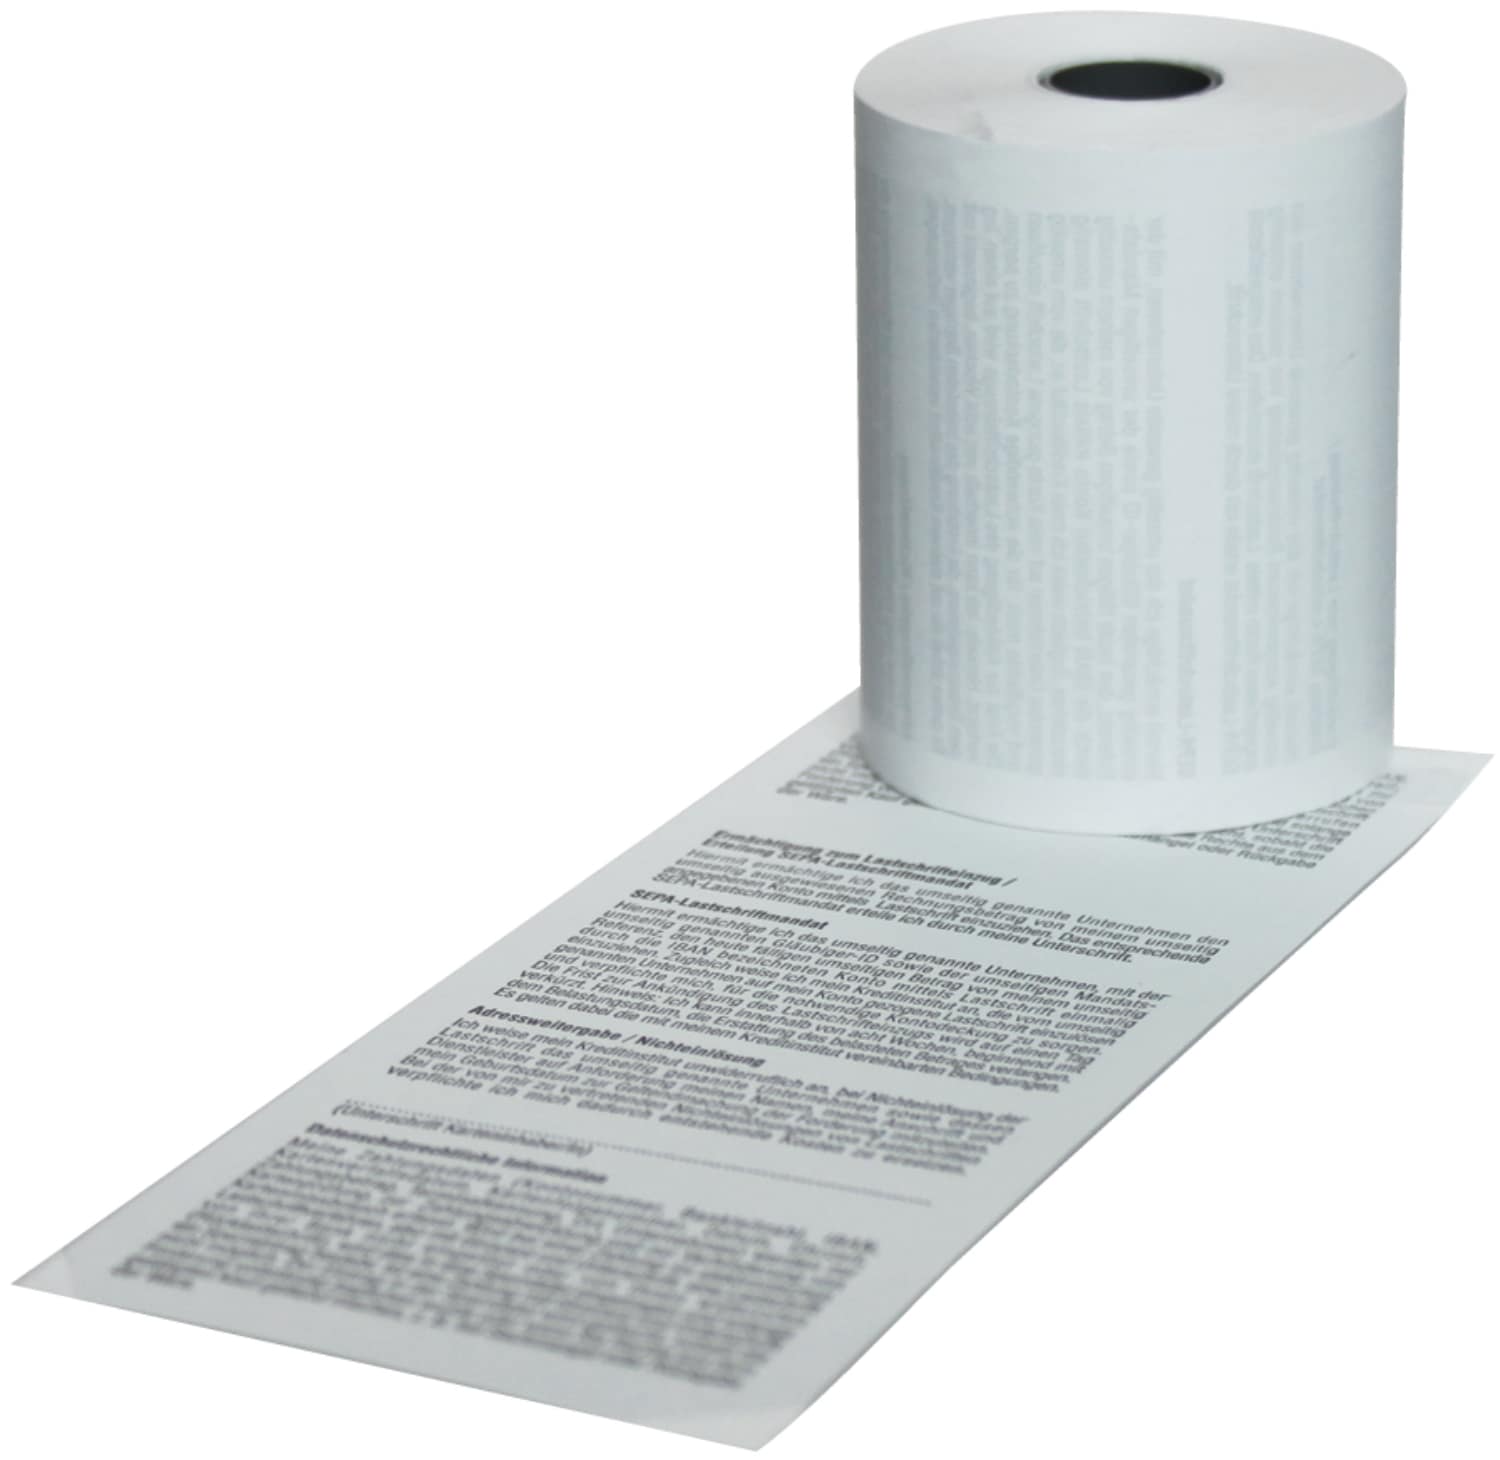 Thermal rolls for cash reigsters